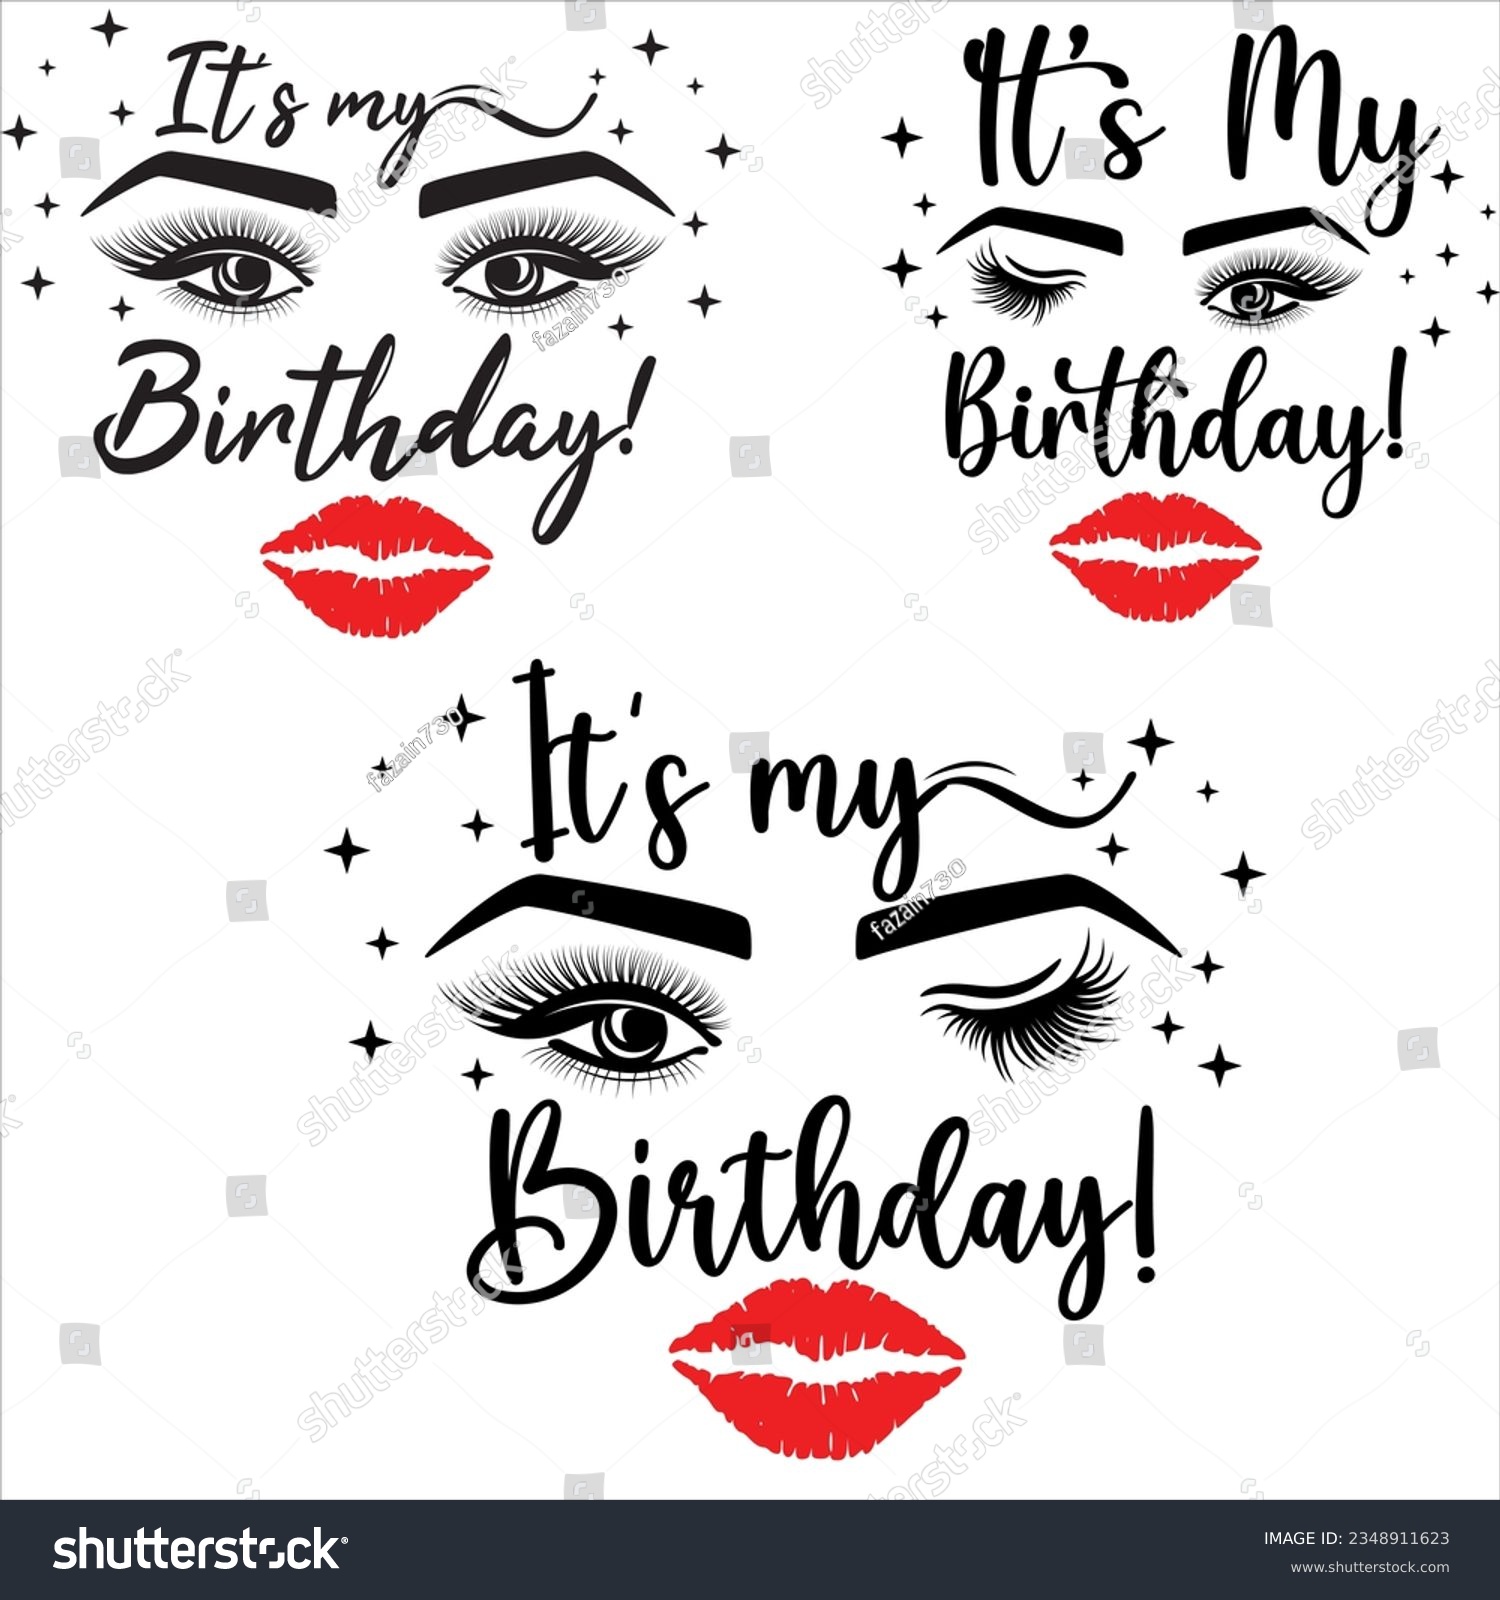 SVG of It's Its my Birthday EPS  Lips Kiss EPSCut File  Cricut  Commercial use  Silhouette  Birthday Girl  Eyebrows eps svg